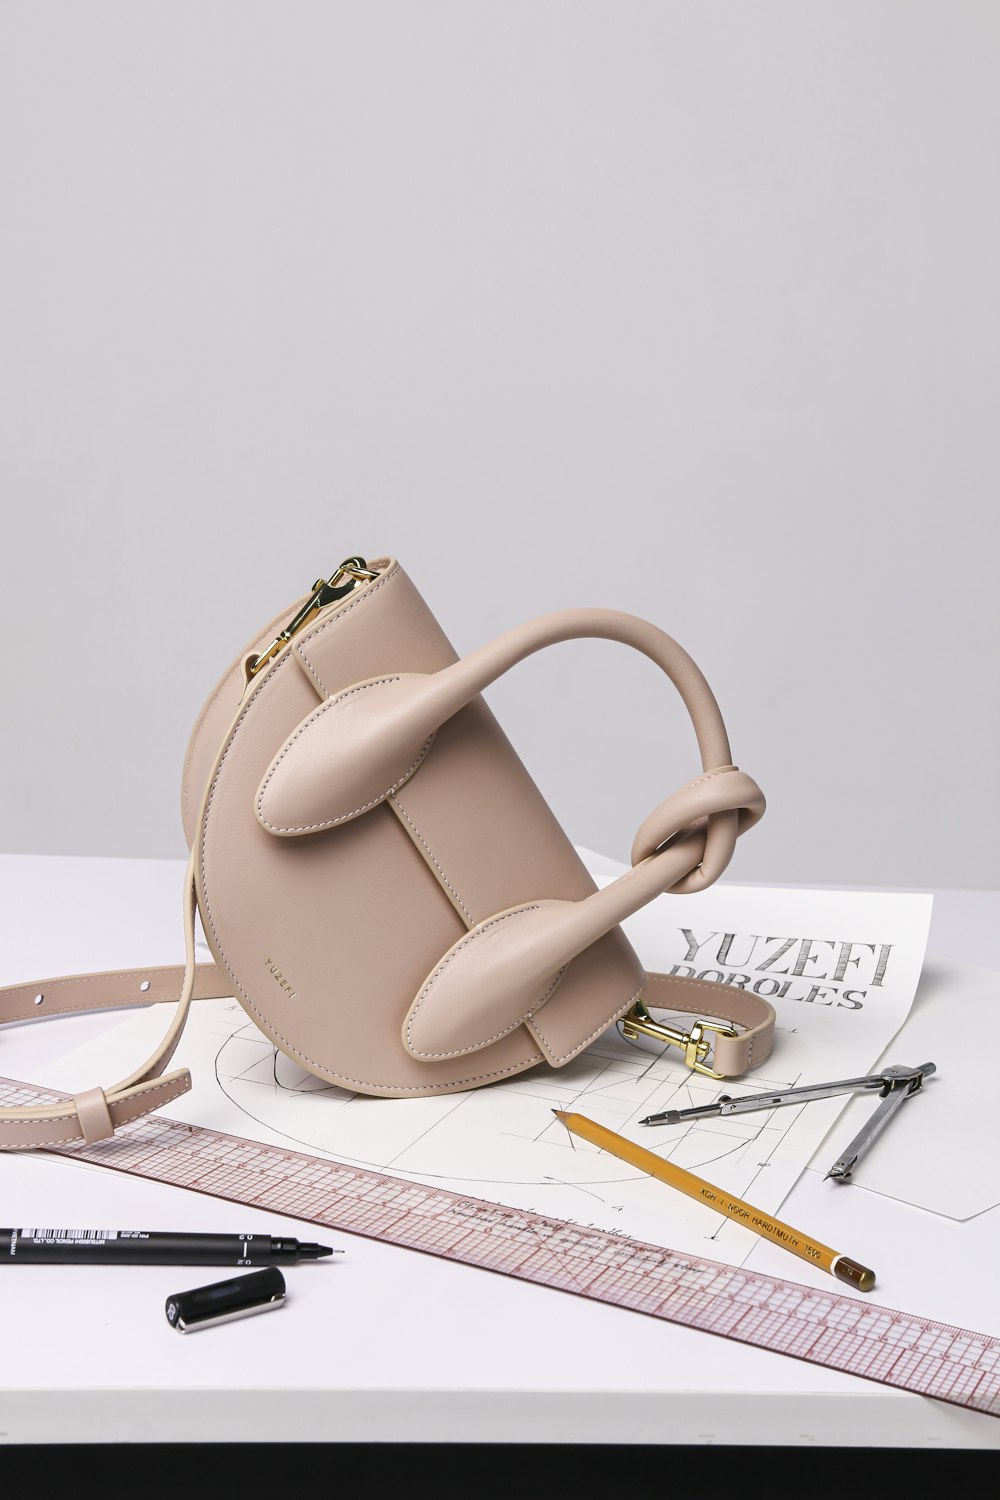 brown leather handbag on white ruled paper